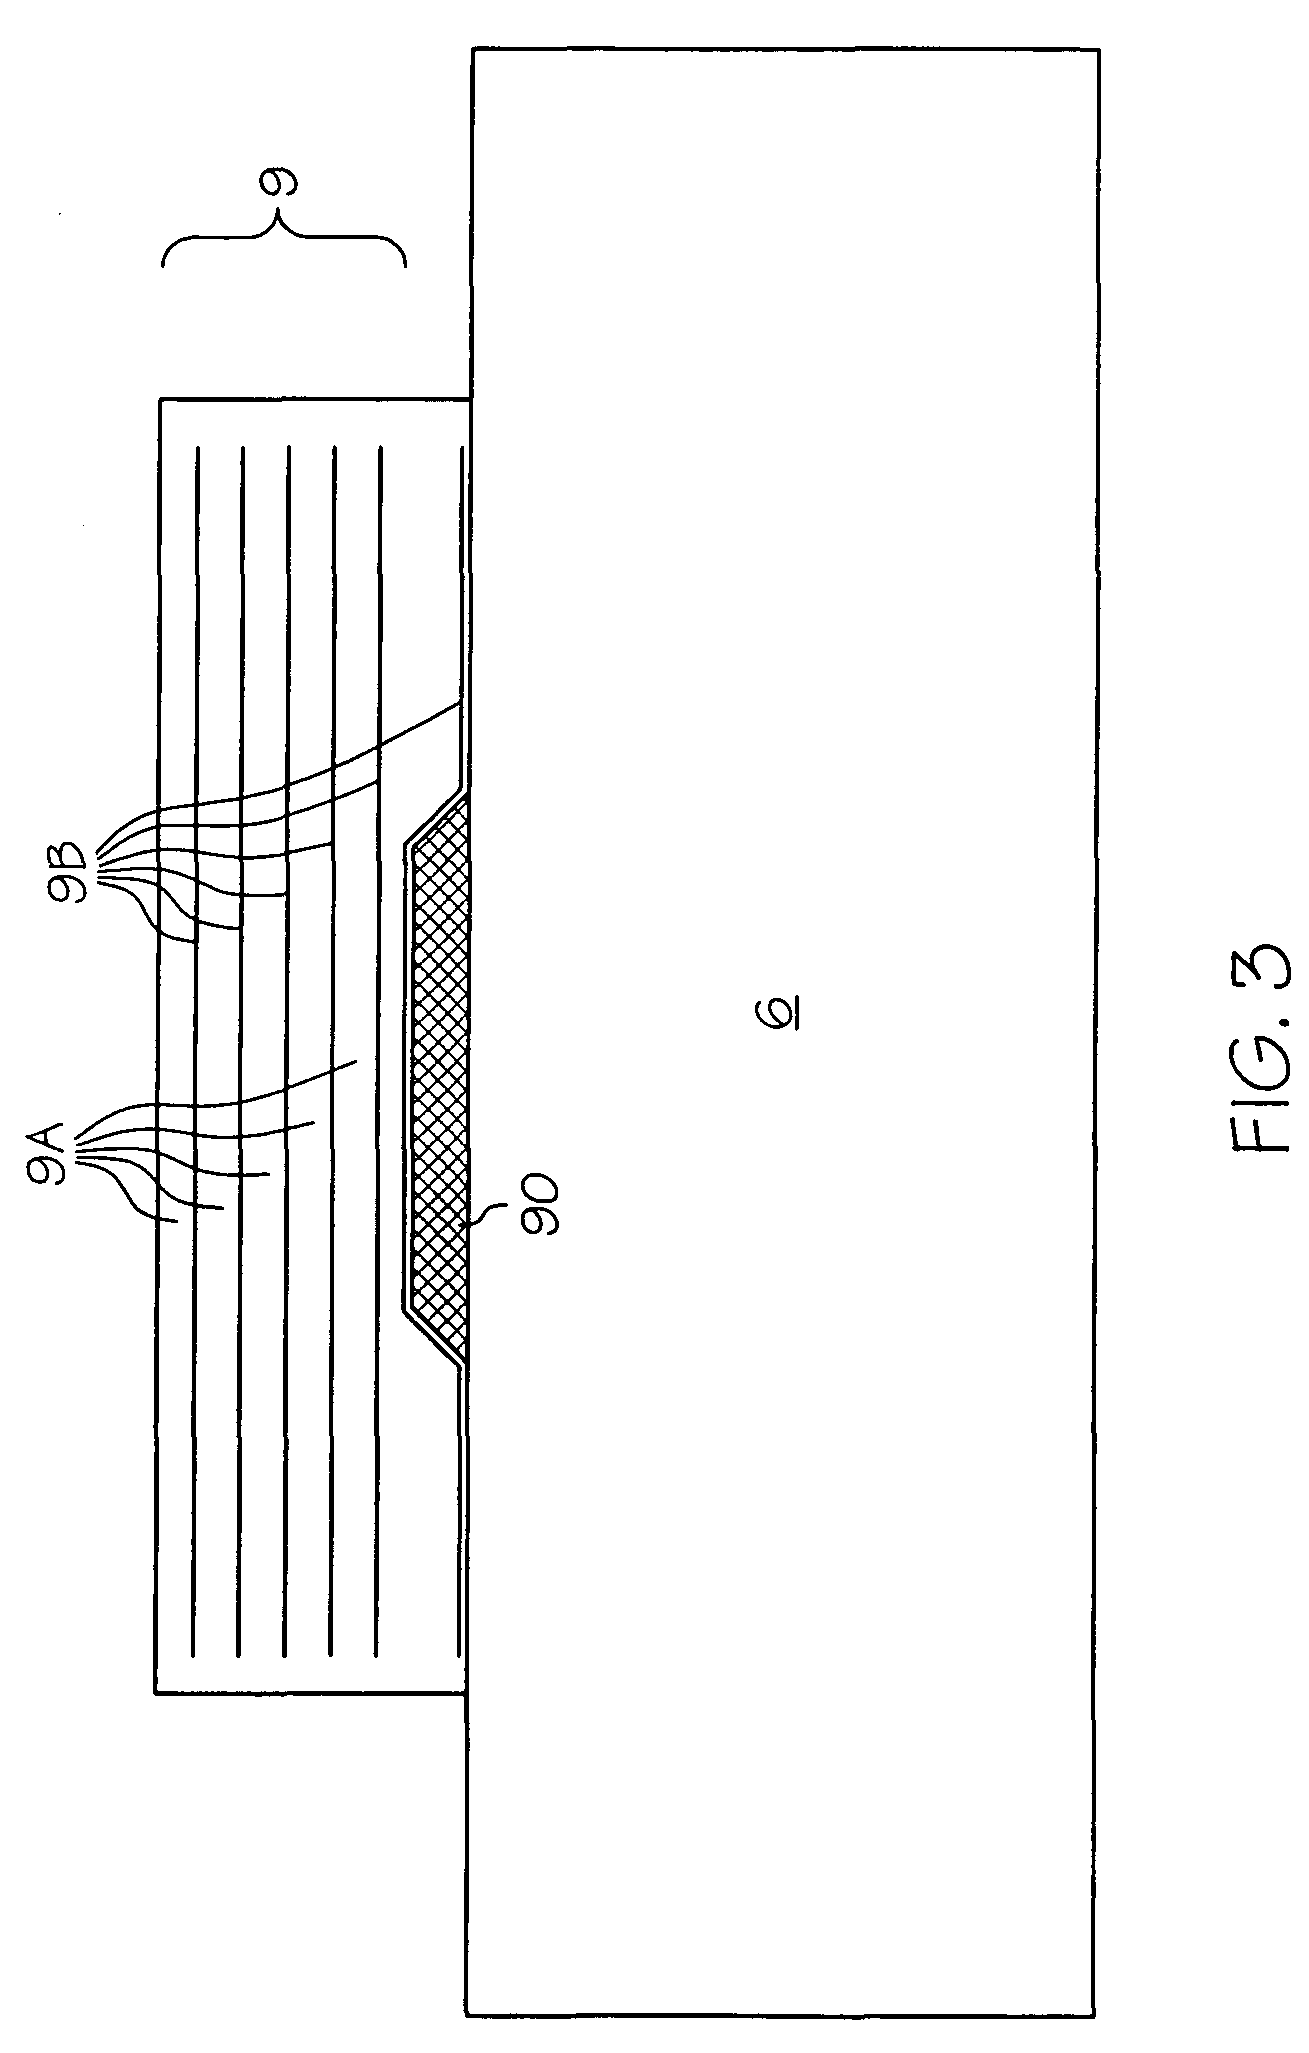 Apparatus for depositing a multilayer coating on discrete sheets